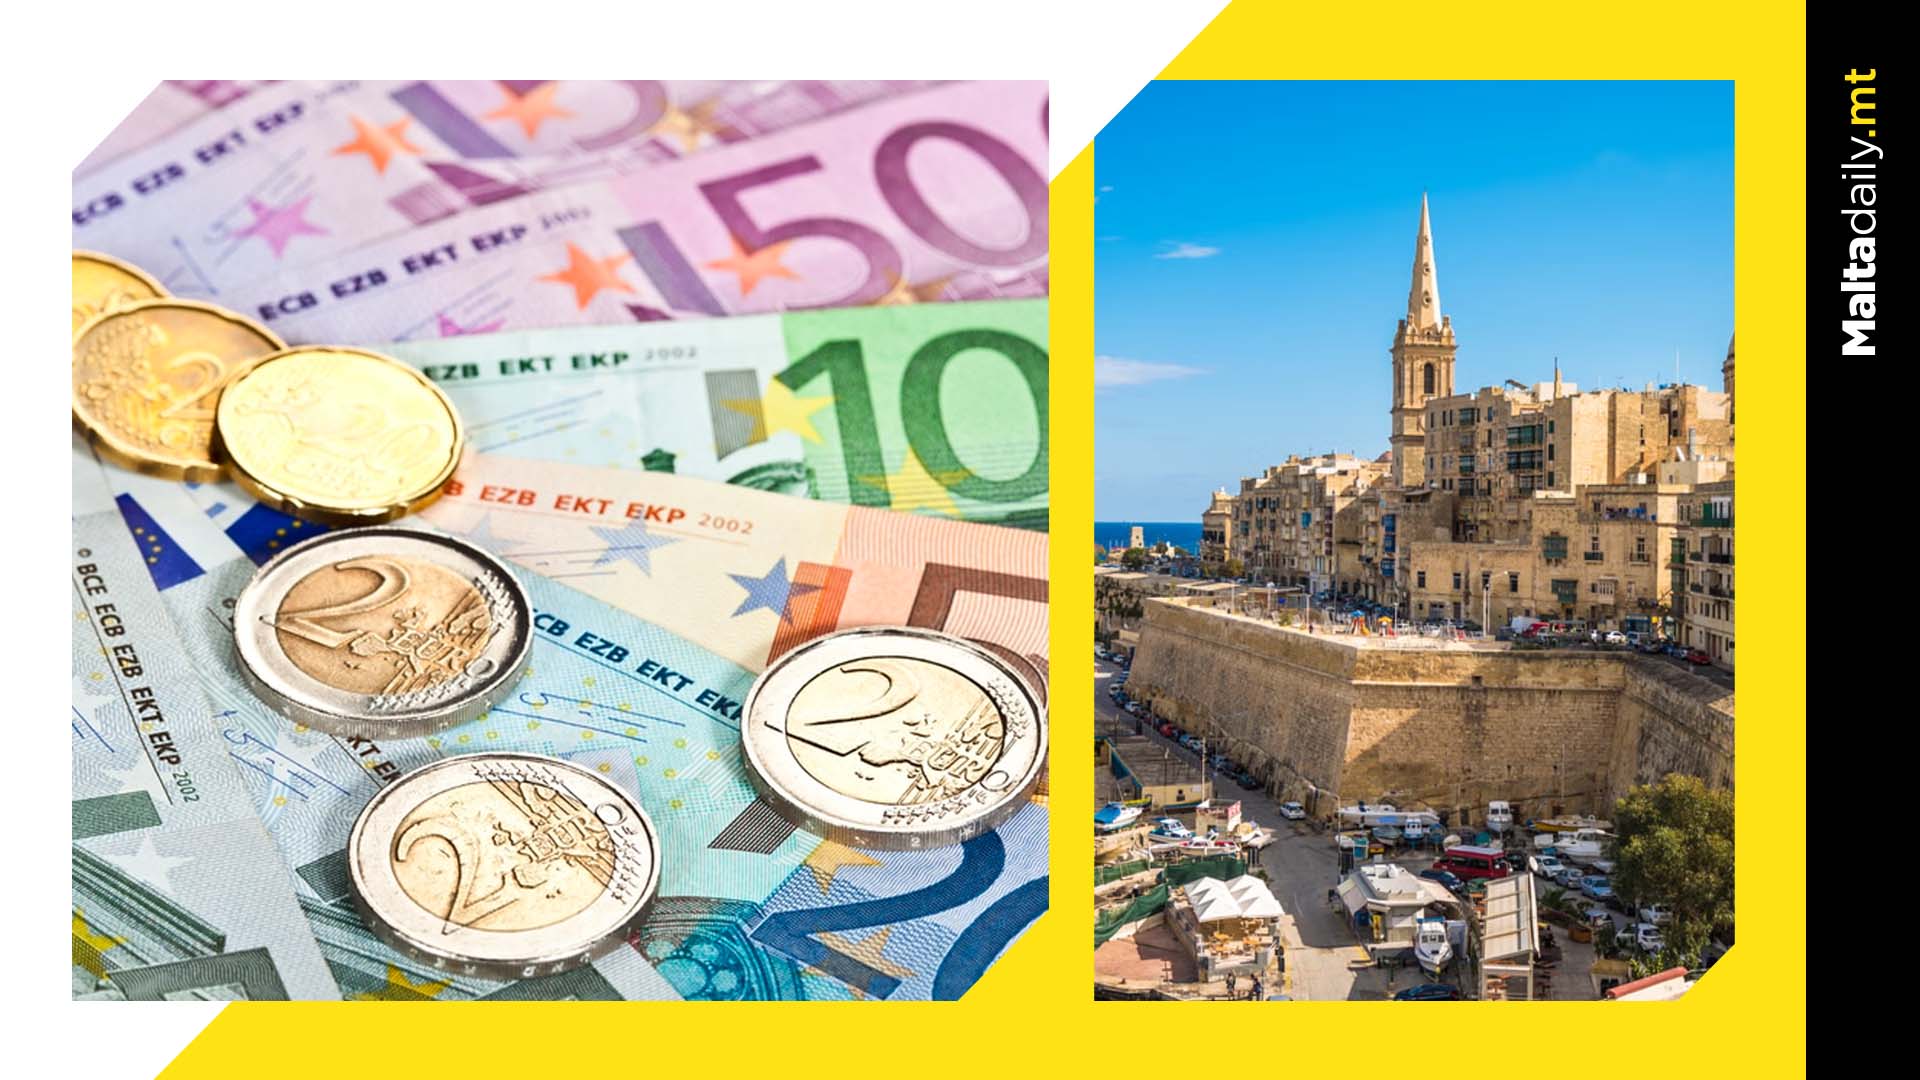 Malta's Minimum Wage Not Enough For Decent Standard of Living, Study States